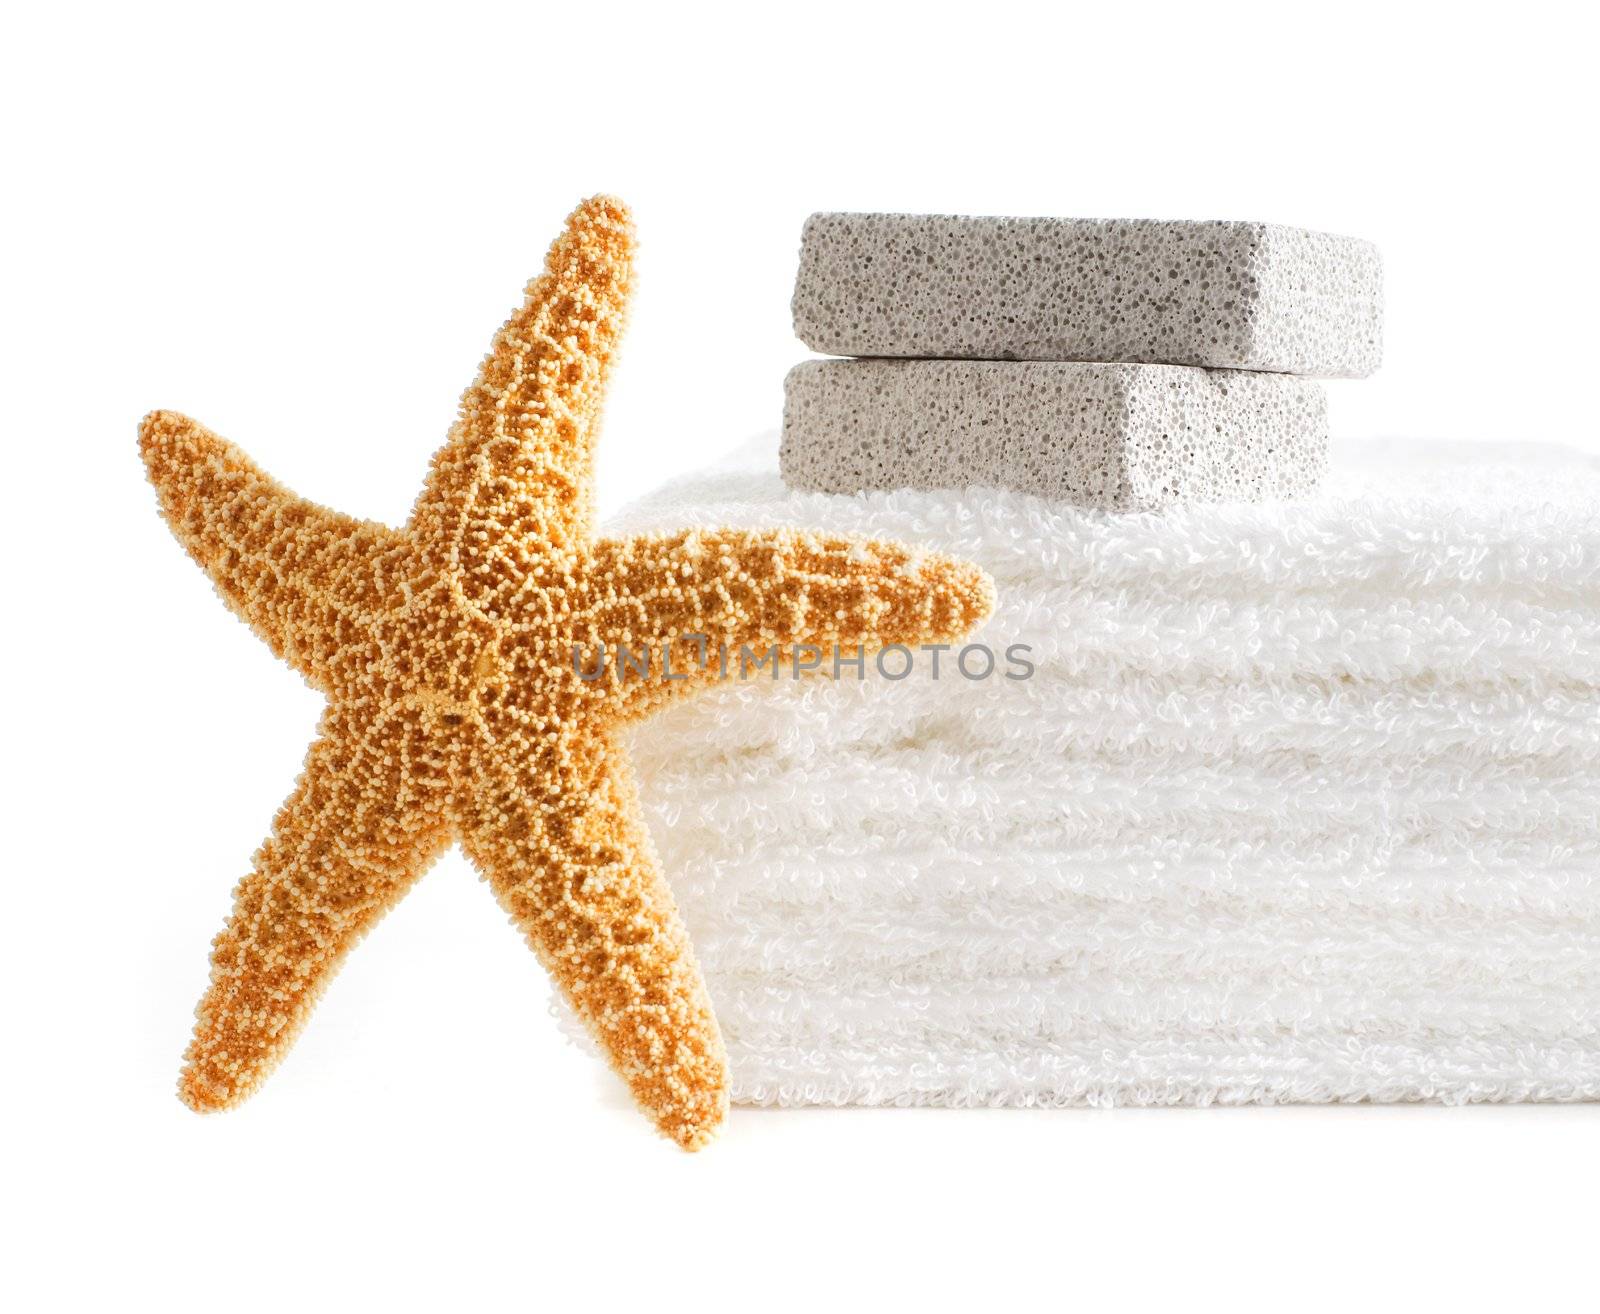 Starfish, towels, and pumice stones against a white background.